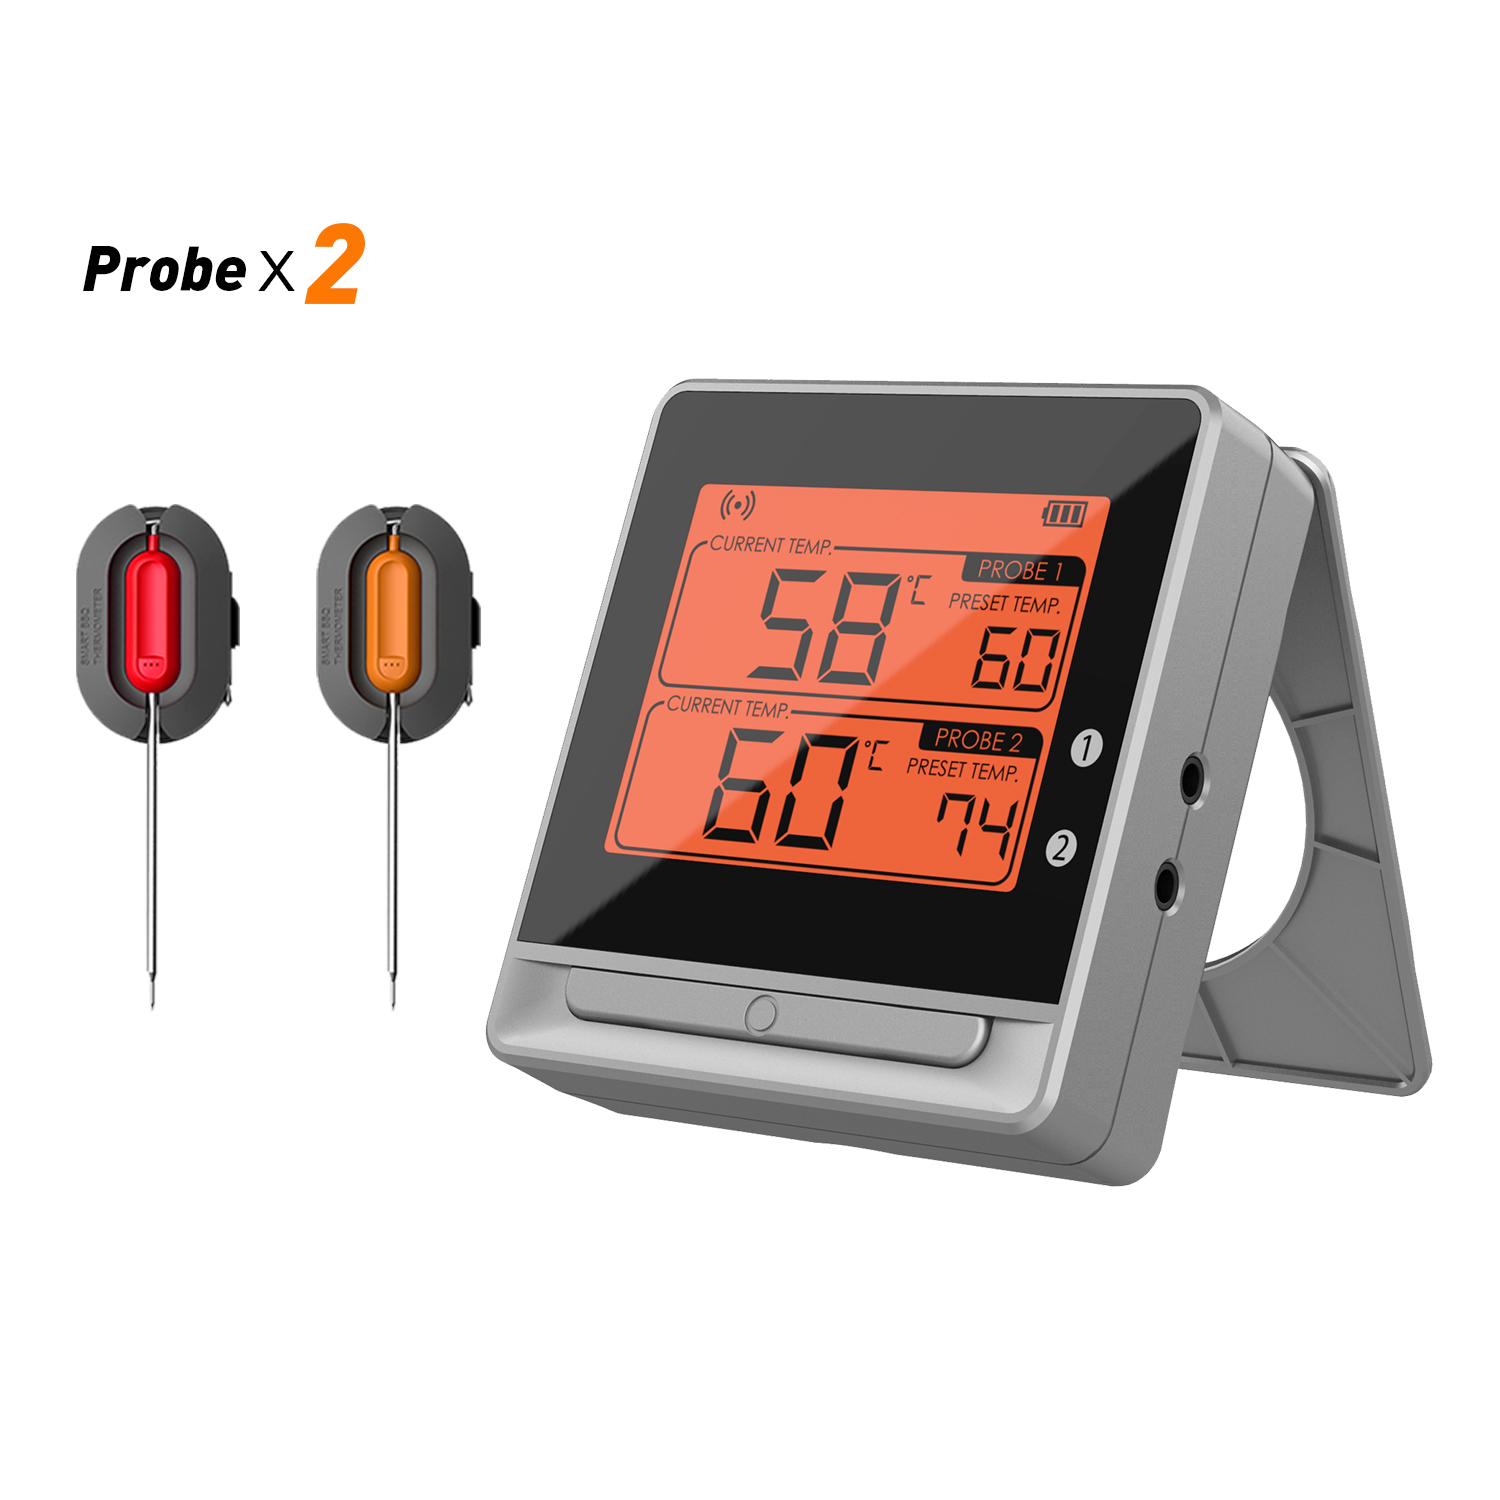 Bluetooth Wireless Meat Thermometer for Grilling, Digital Food Thermometer with 2 Probes